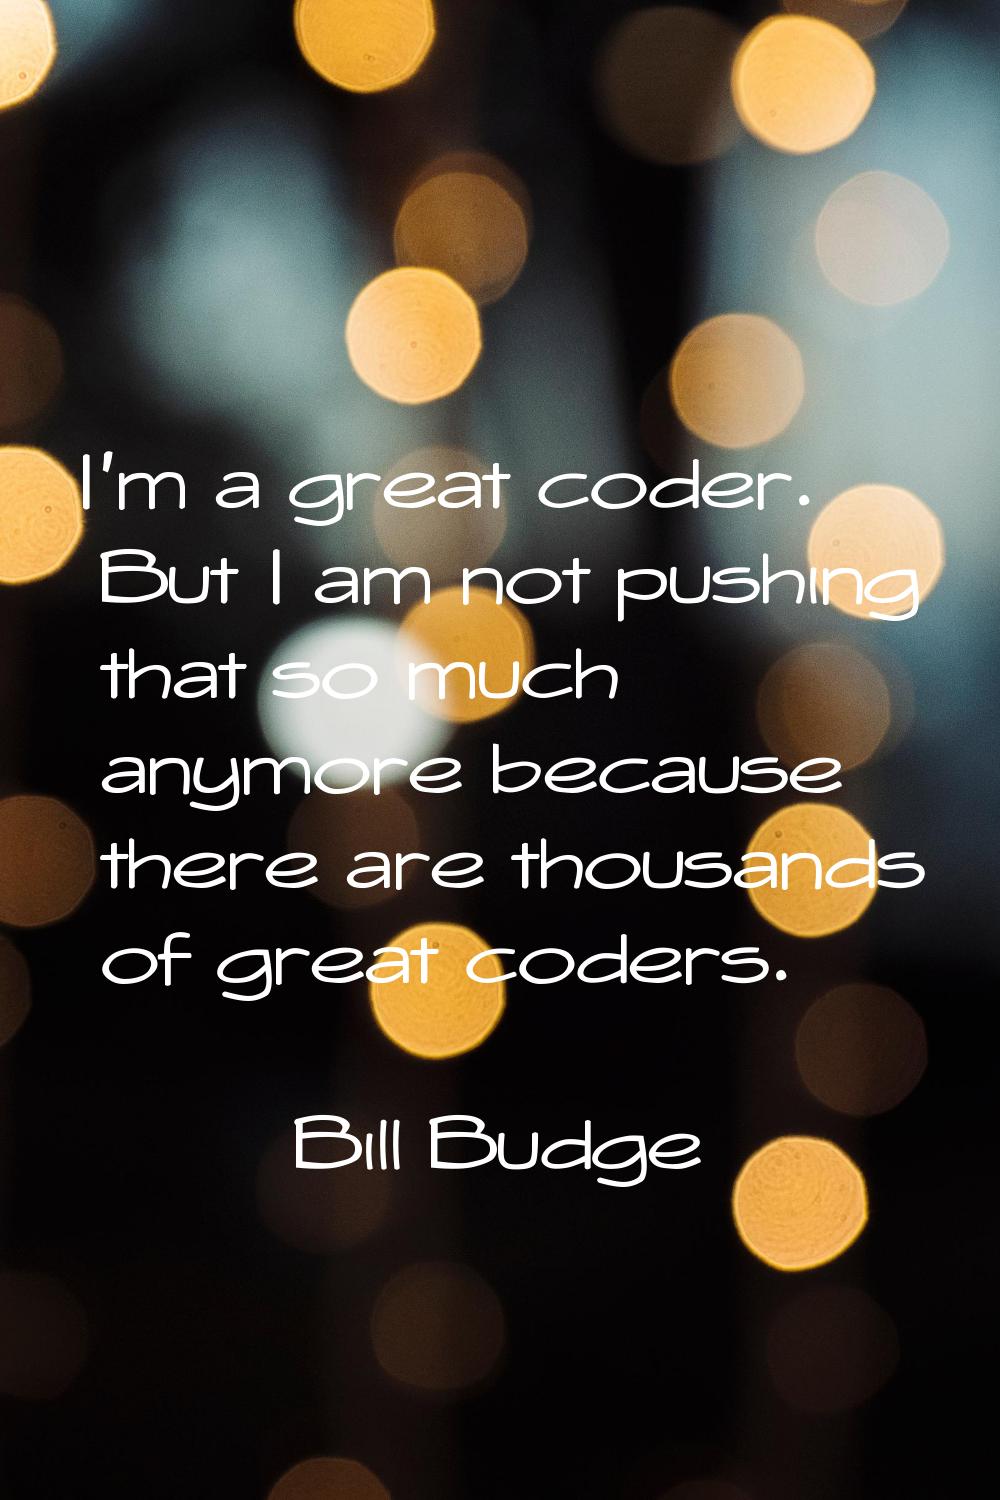 I'm a great coder. But I am not pushing that so much anymore because there are thousands of great c